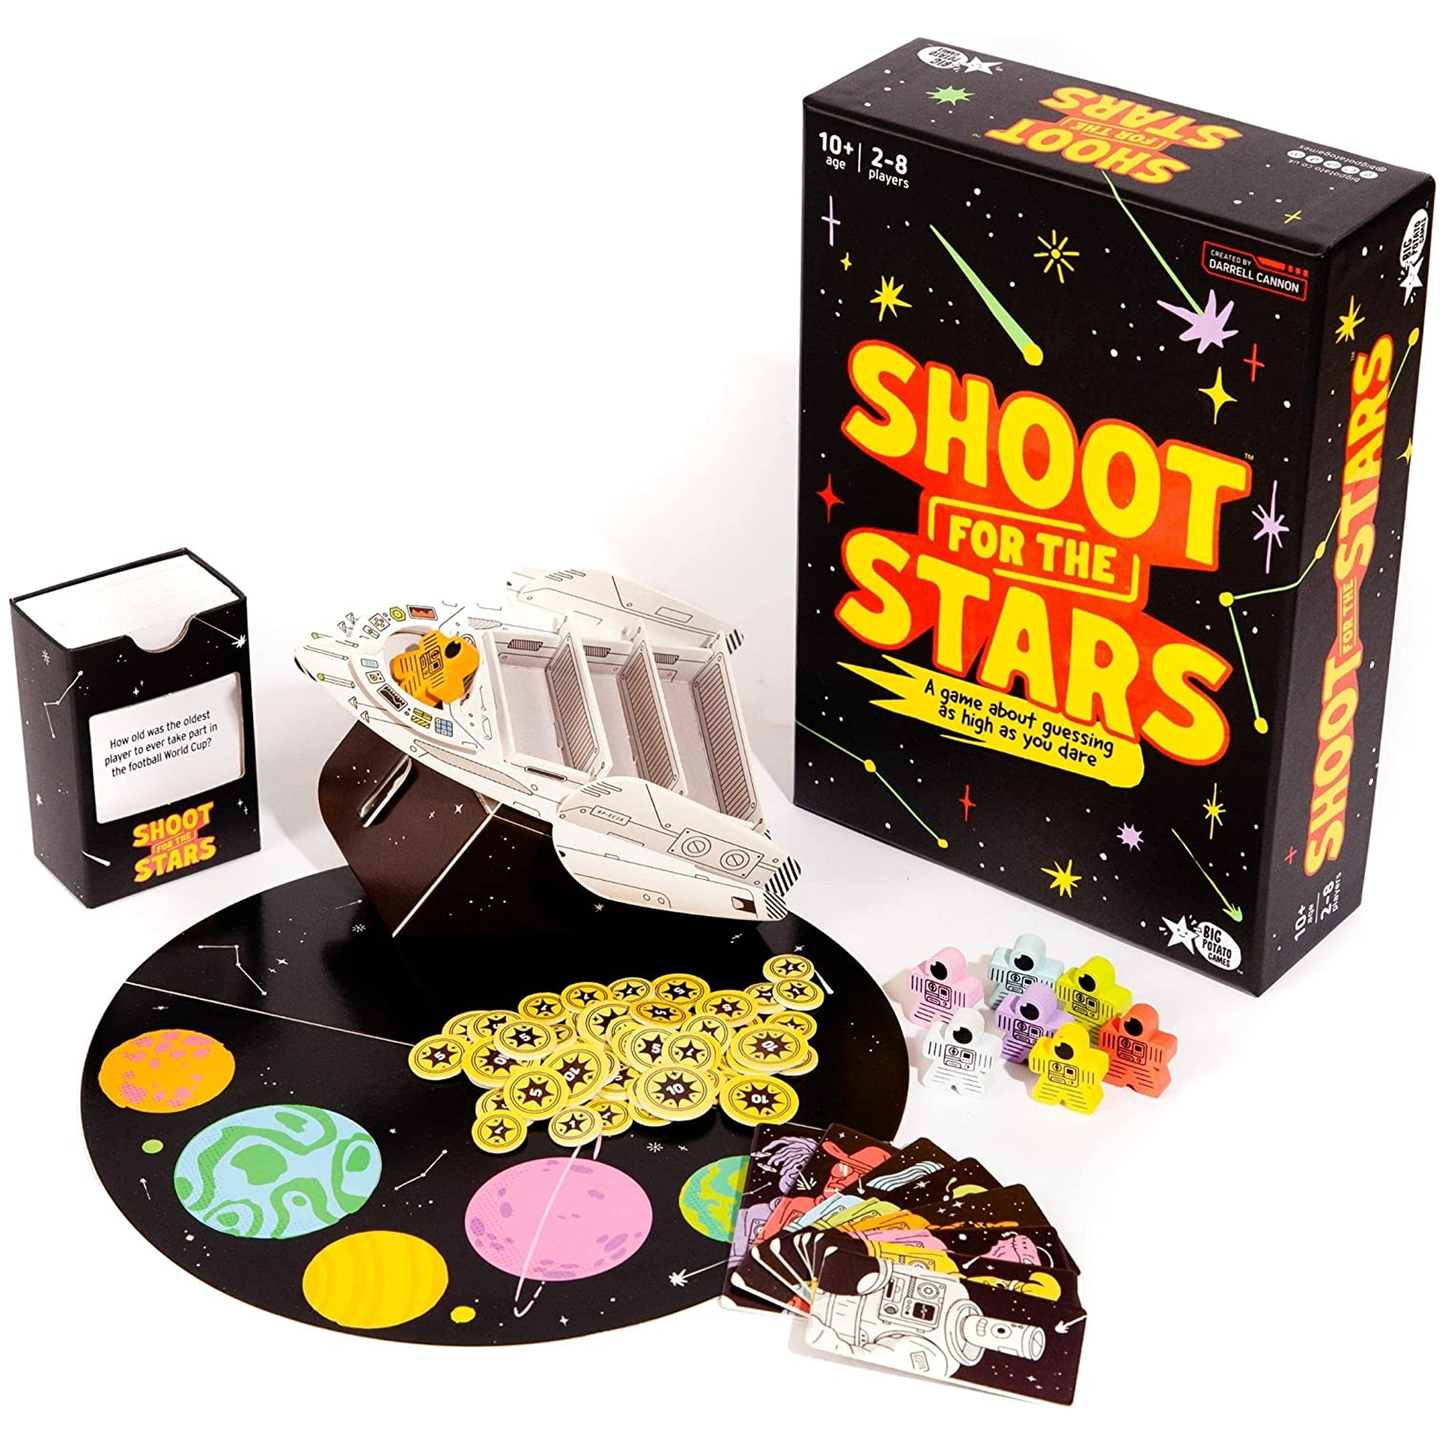 Shoot for the Stars Board Game Box and Contents | Happy Piranha